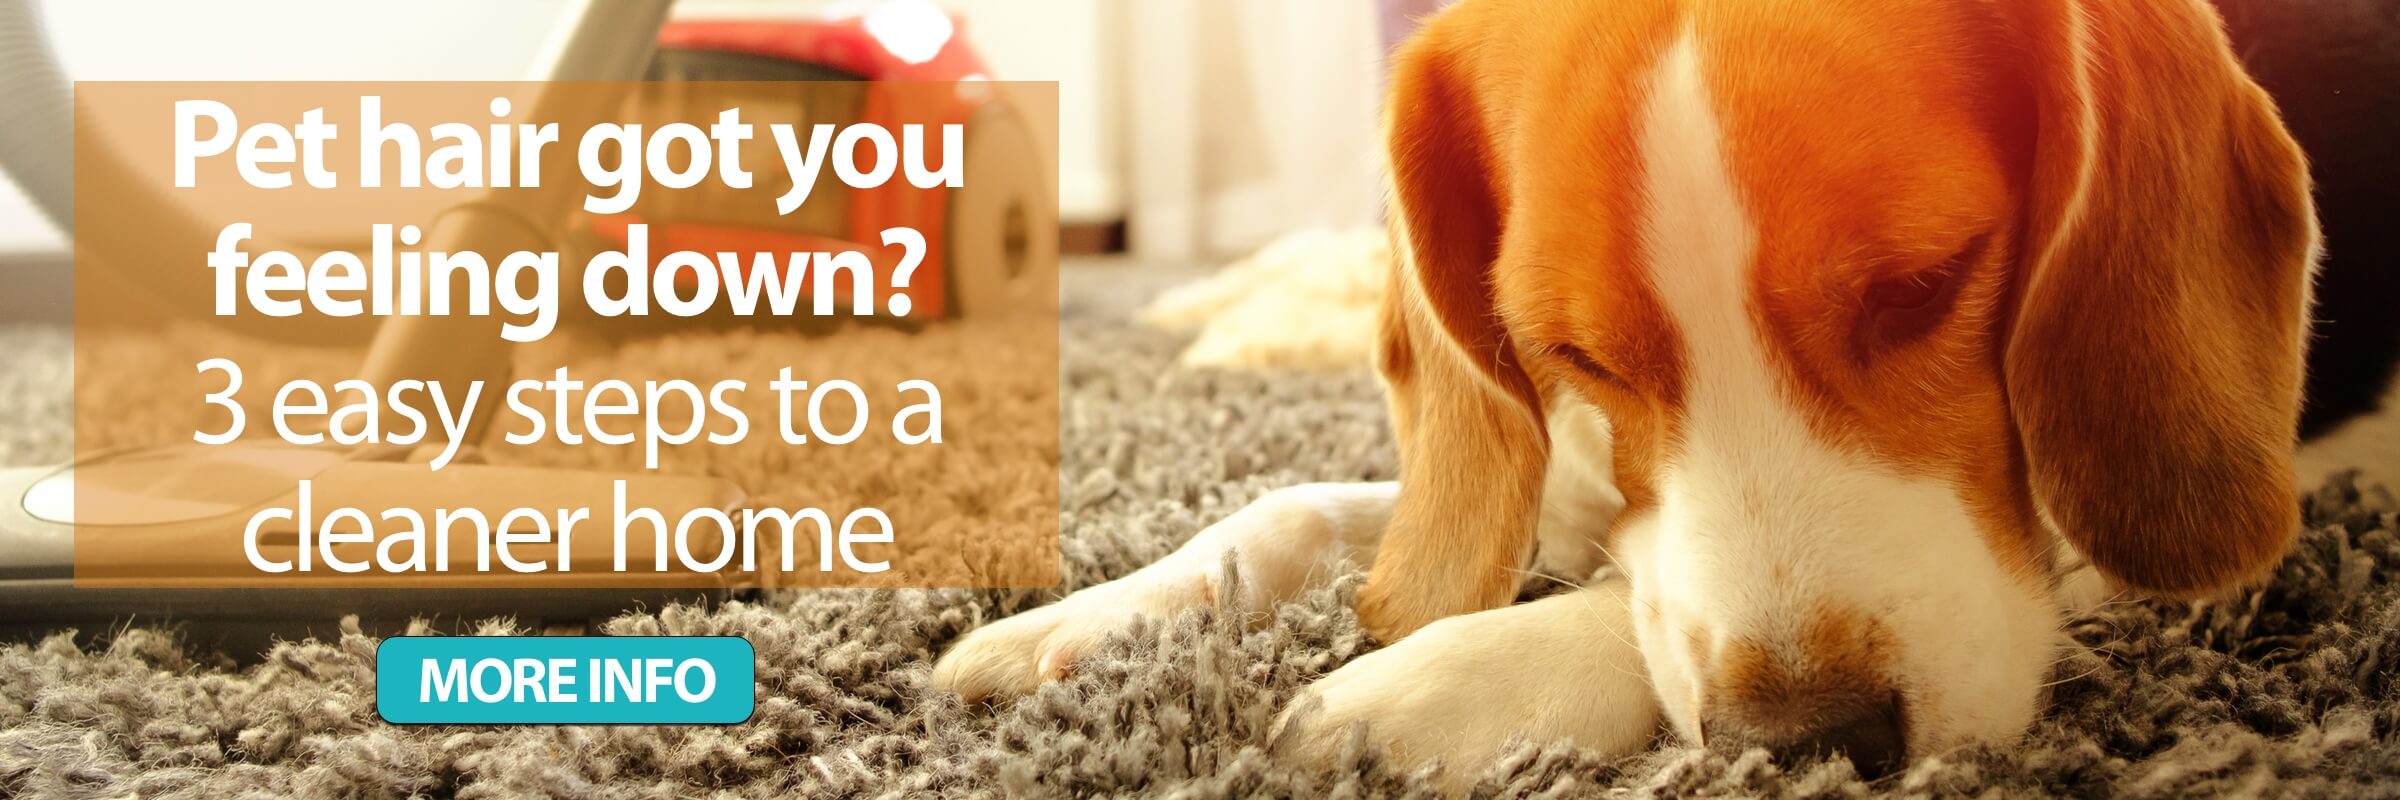 Pet hair got you feeling down 3 easy steps to a cleaner home